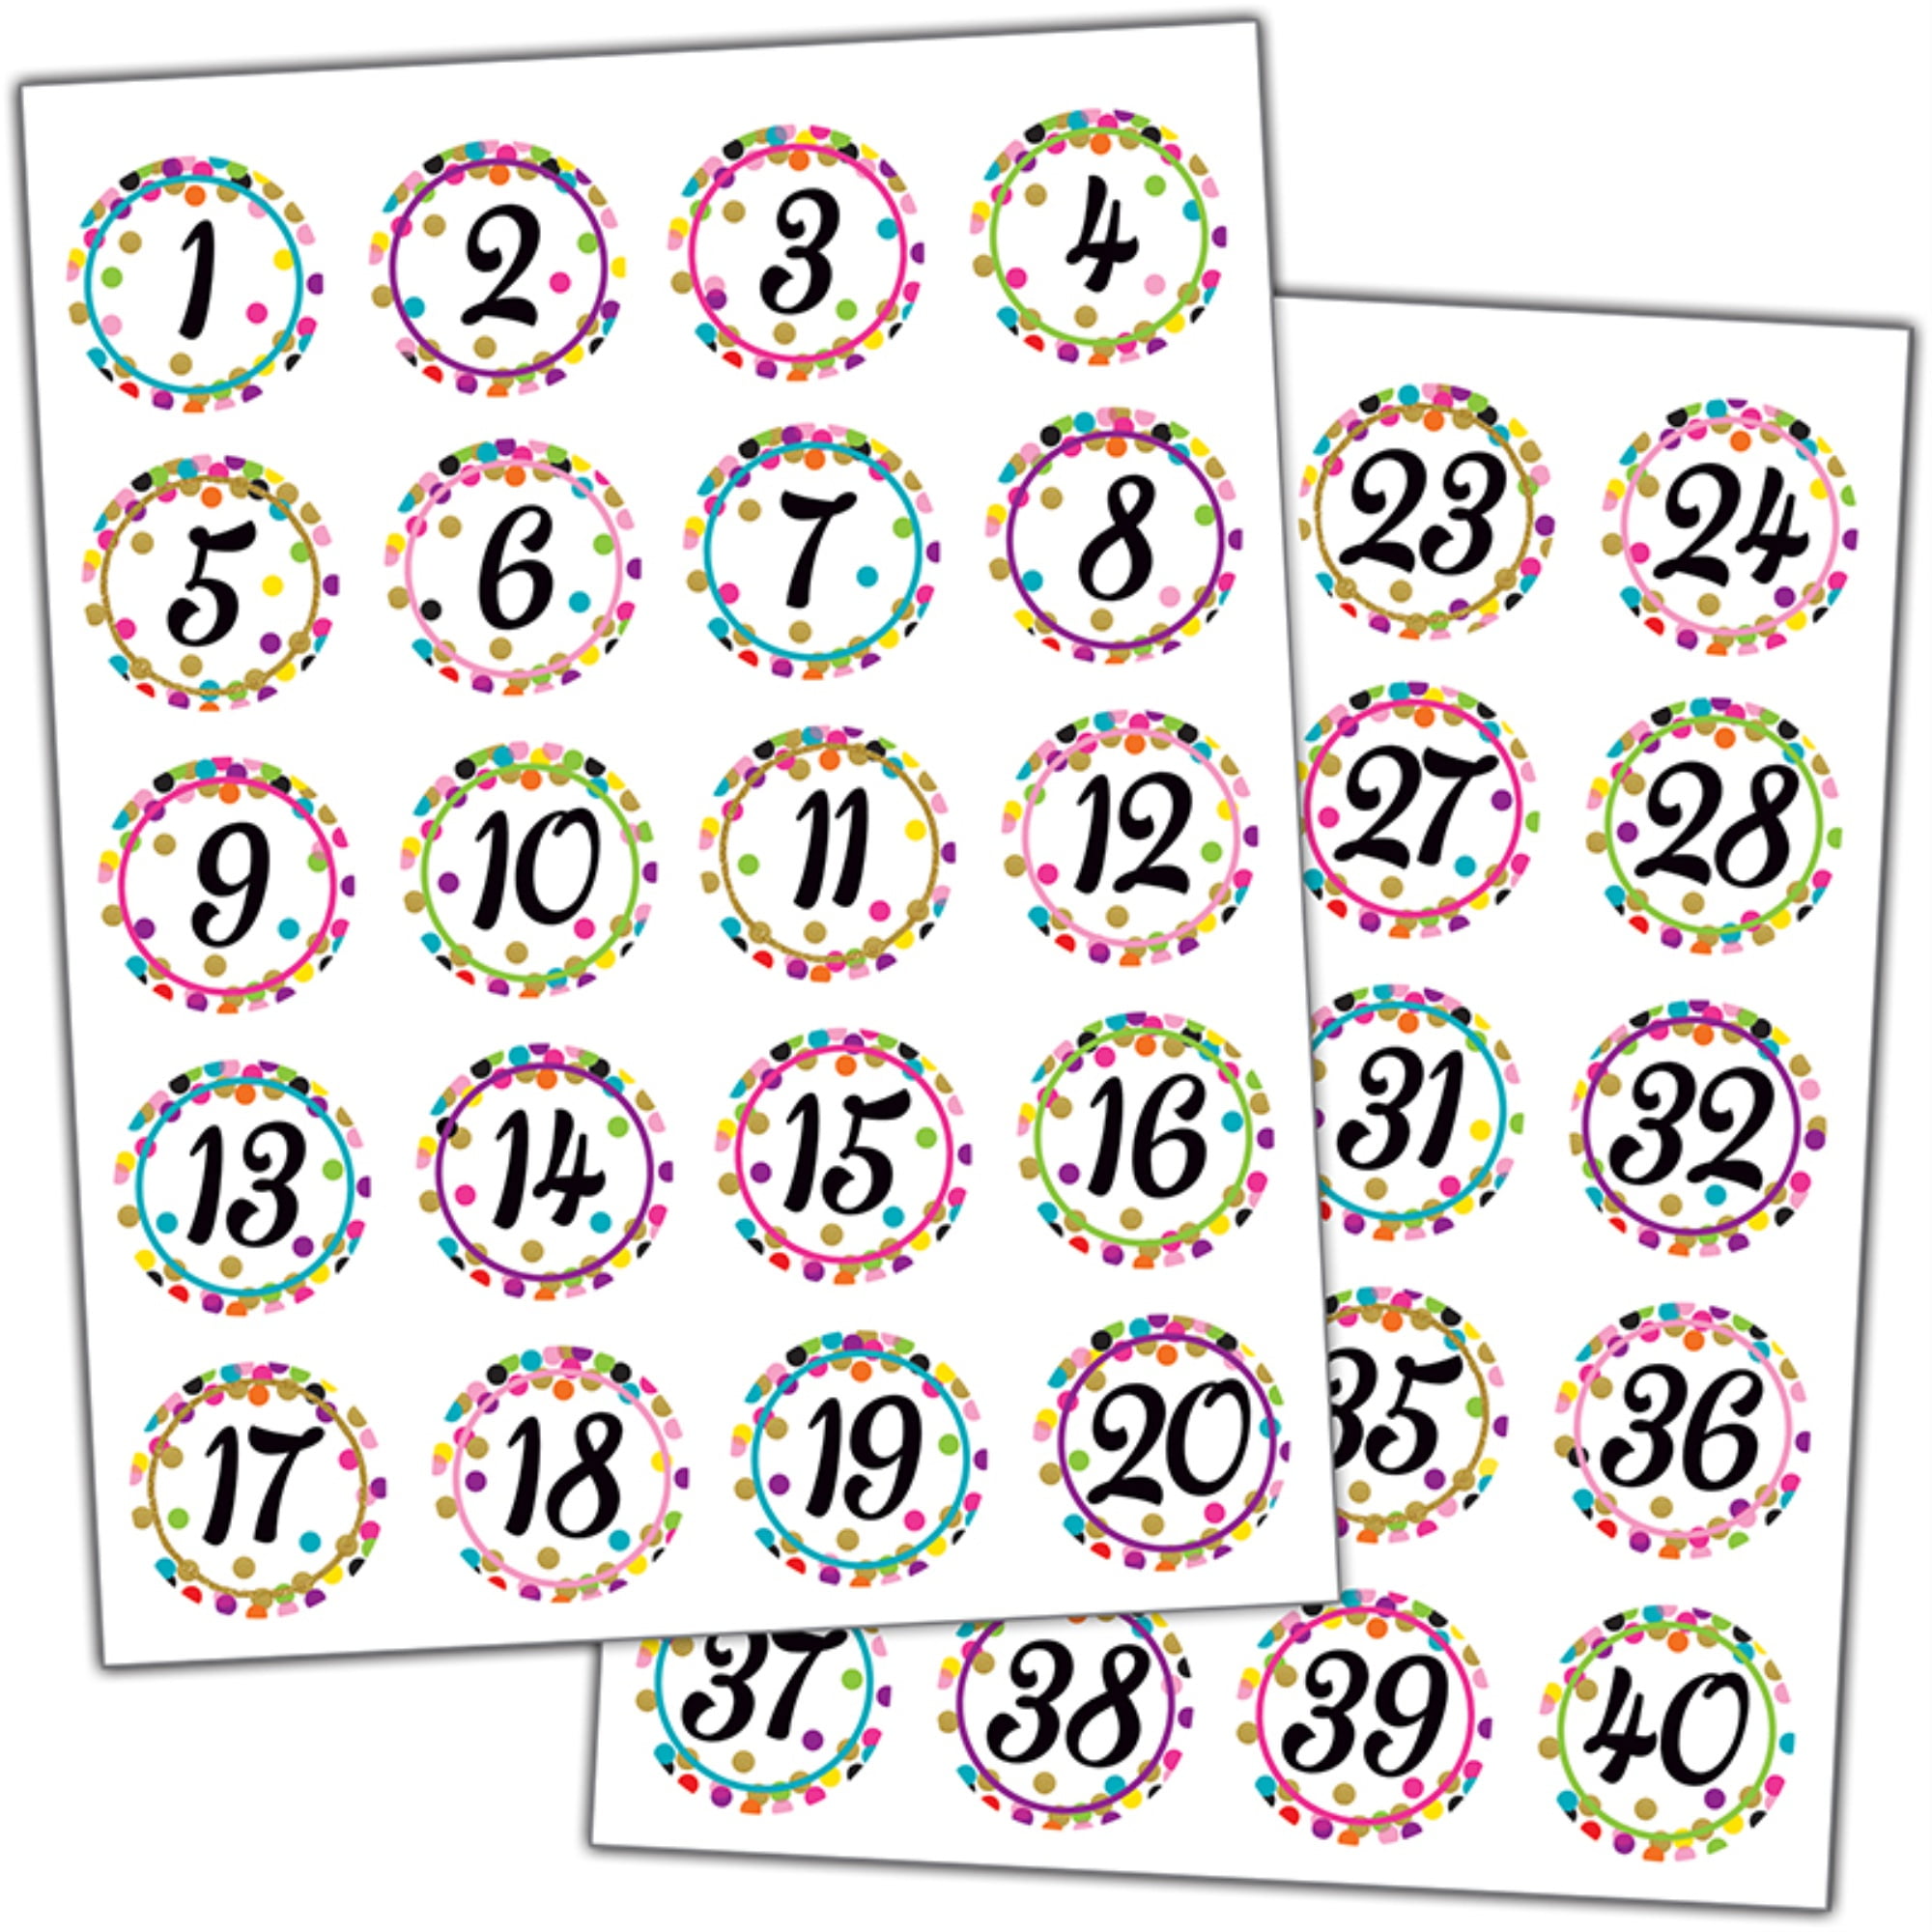 SELF ADHESIVE NUMBERS stickers graphics 30 OR 40mm 1-40 vinyl set 